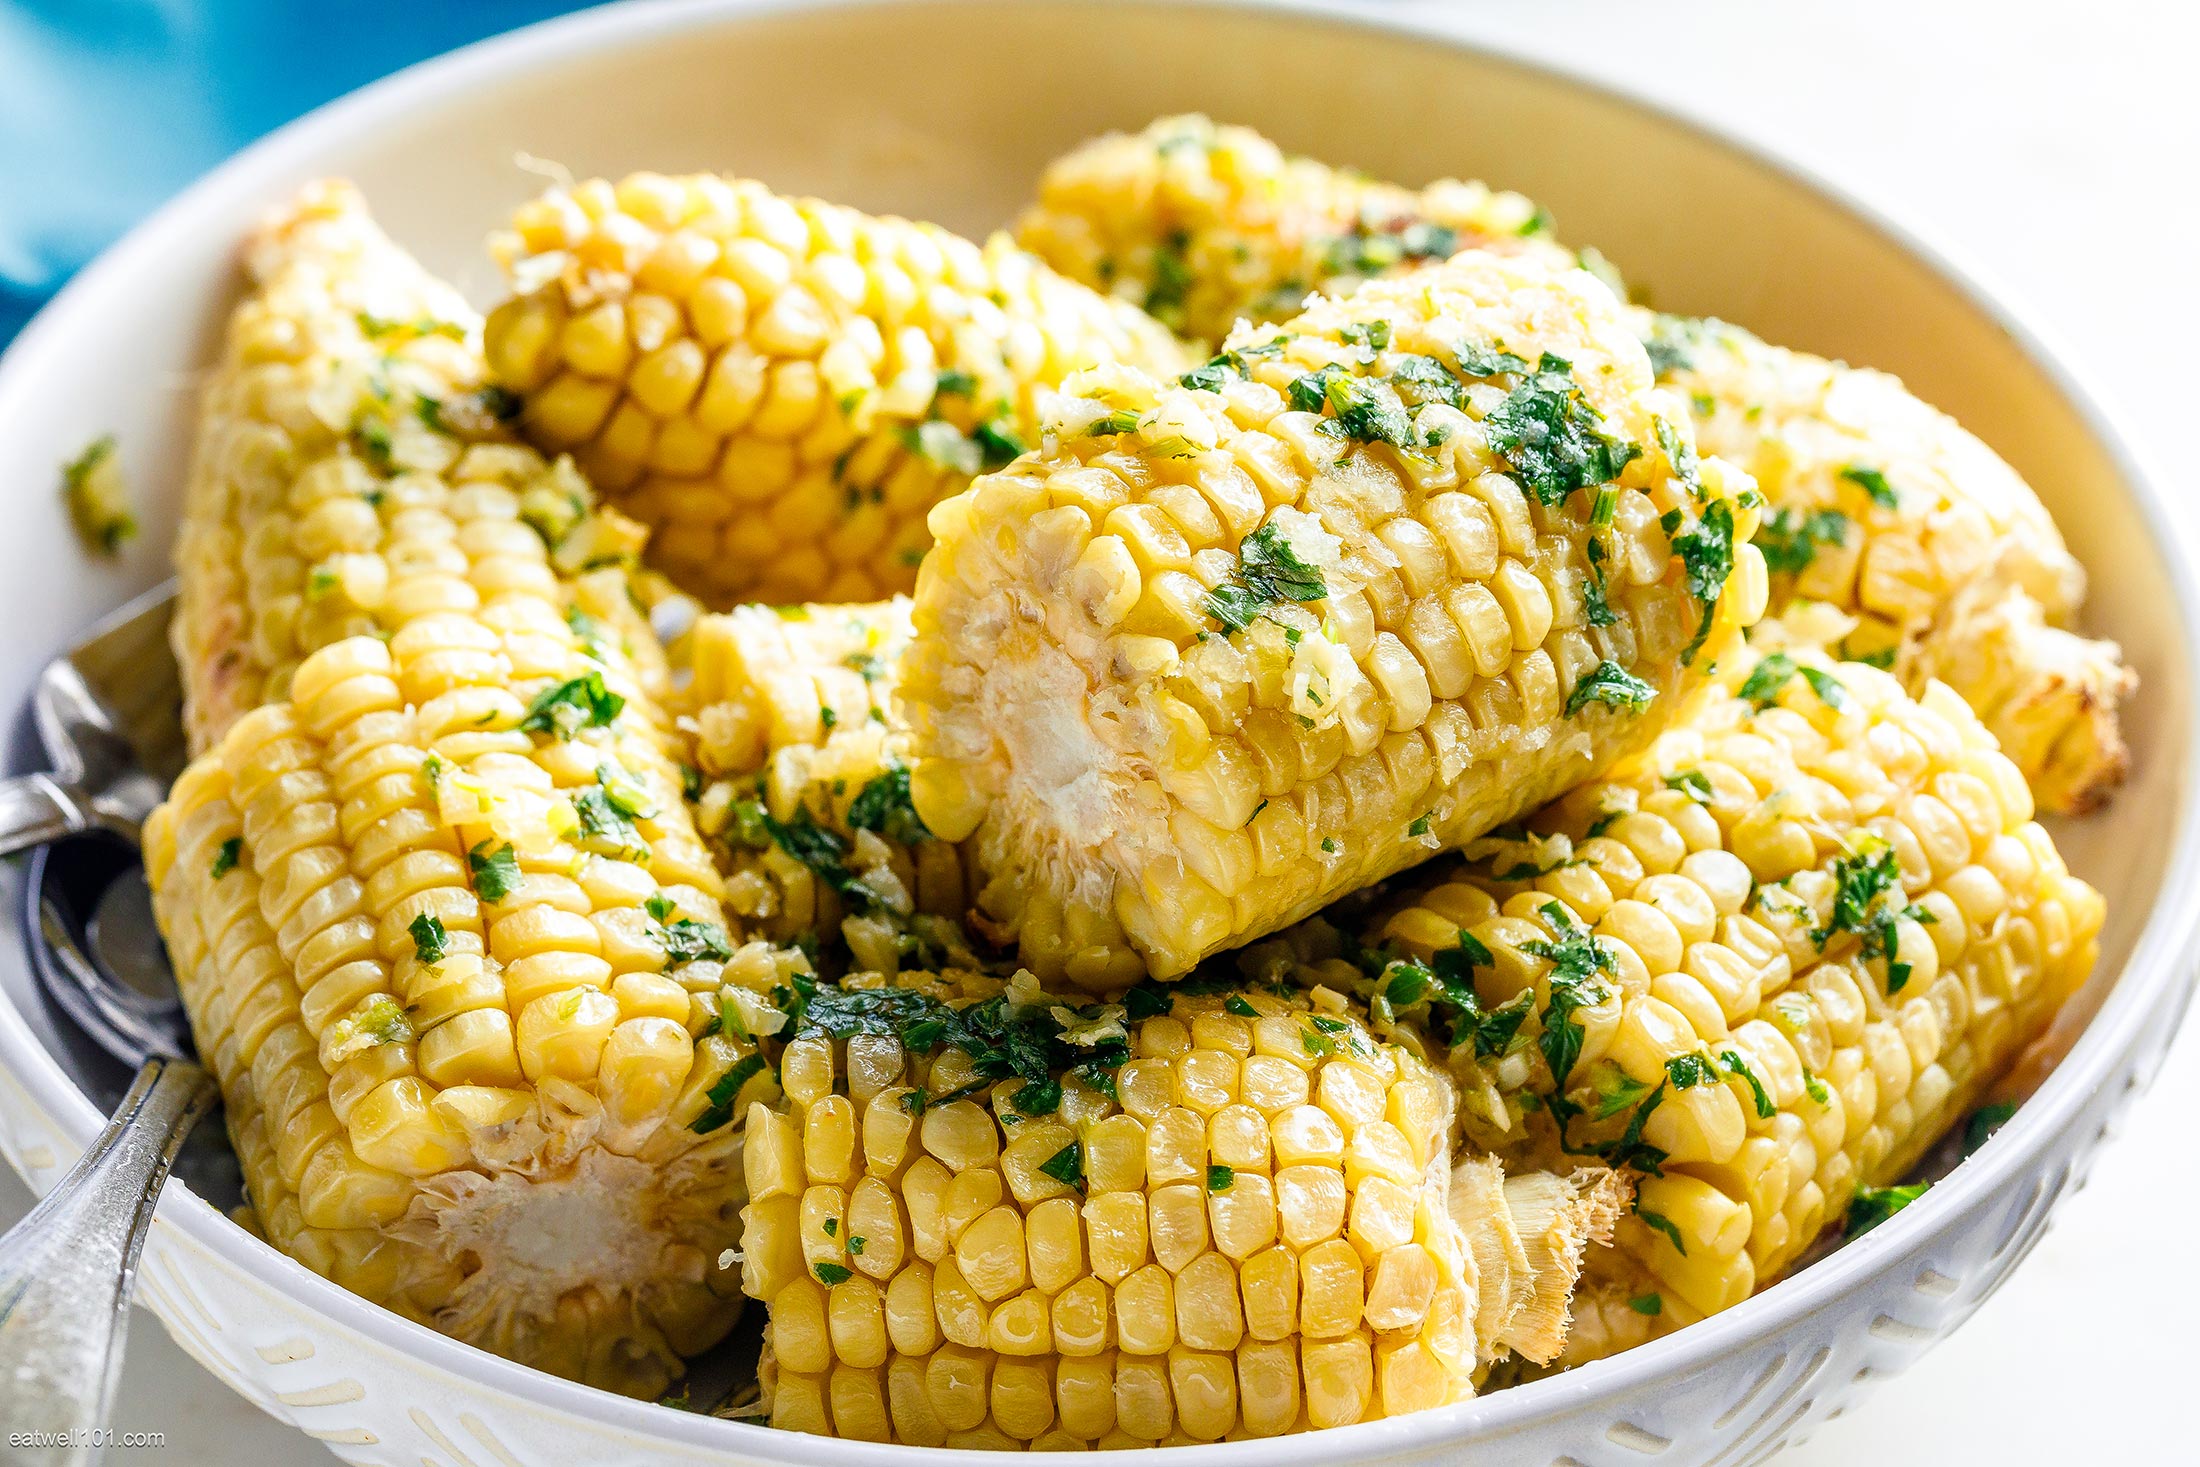 Baked Corn on the Cob Recipe Baked Corn Recipe with Garlic Parmesan